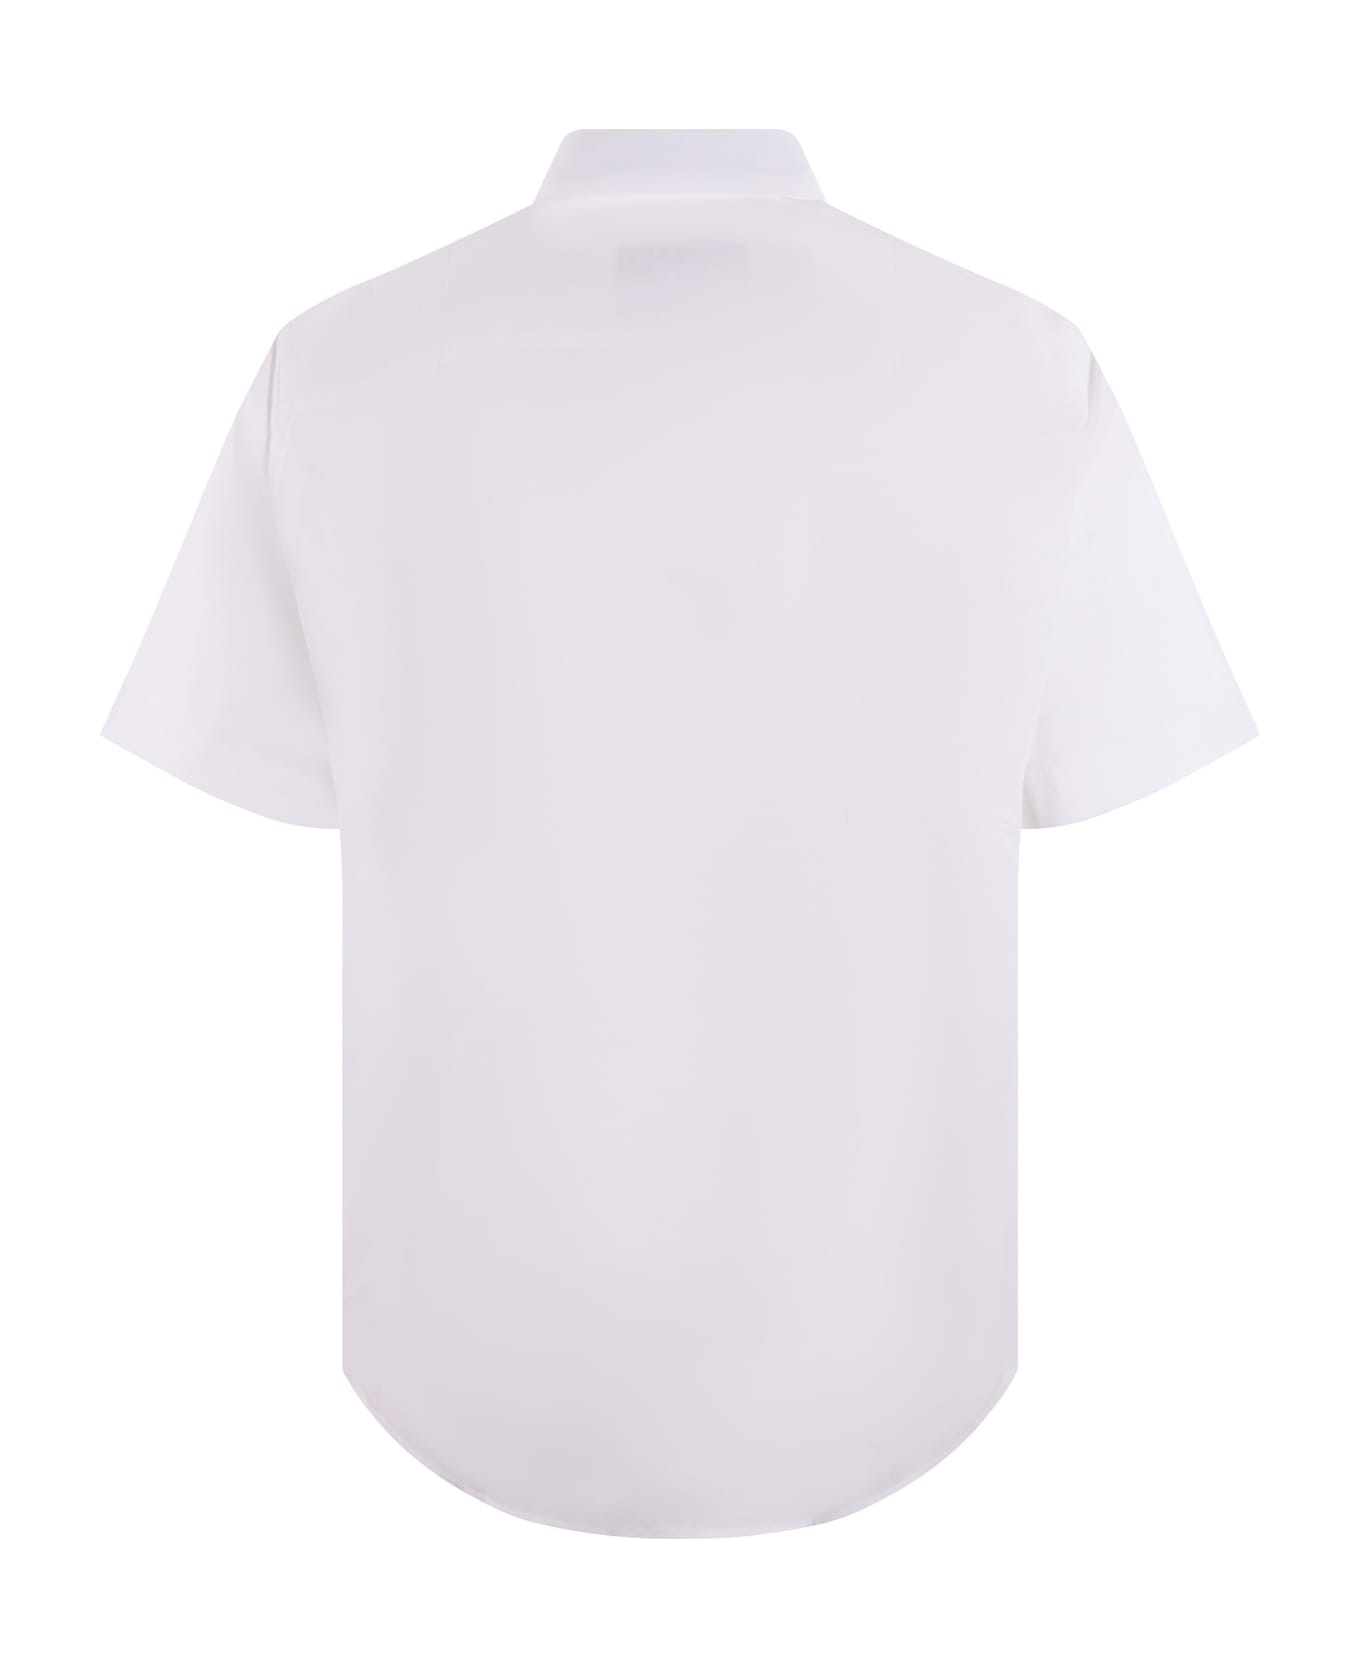 Versace Jeans Couture Shirt - Bianco シャツ